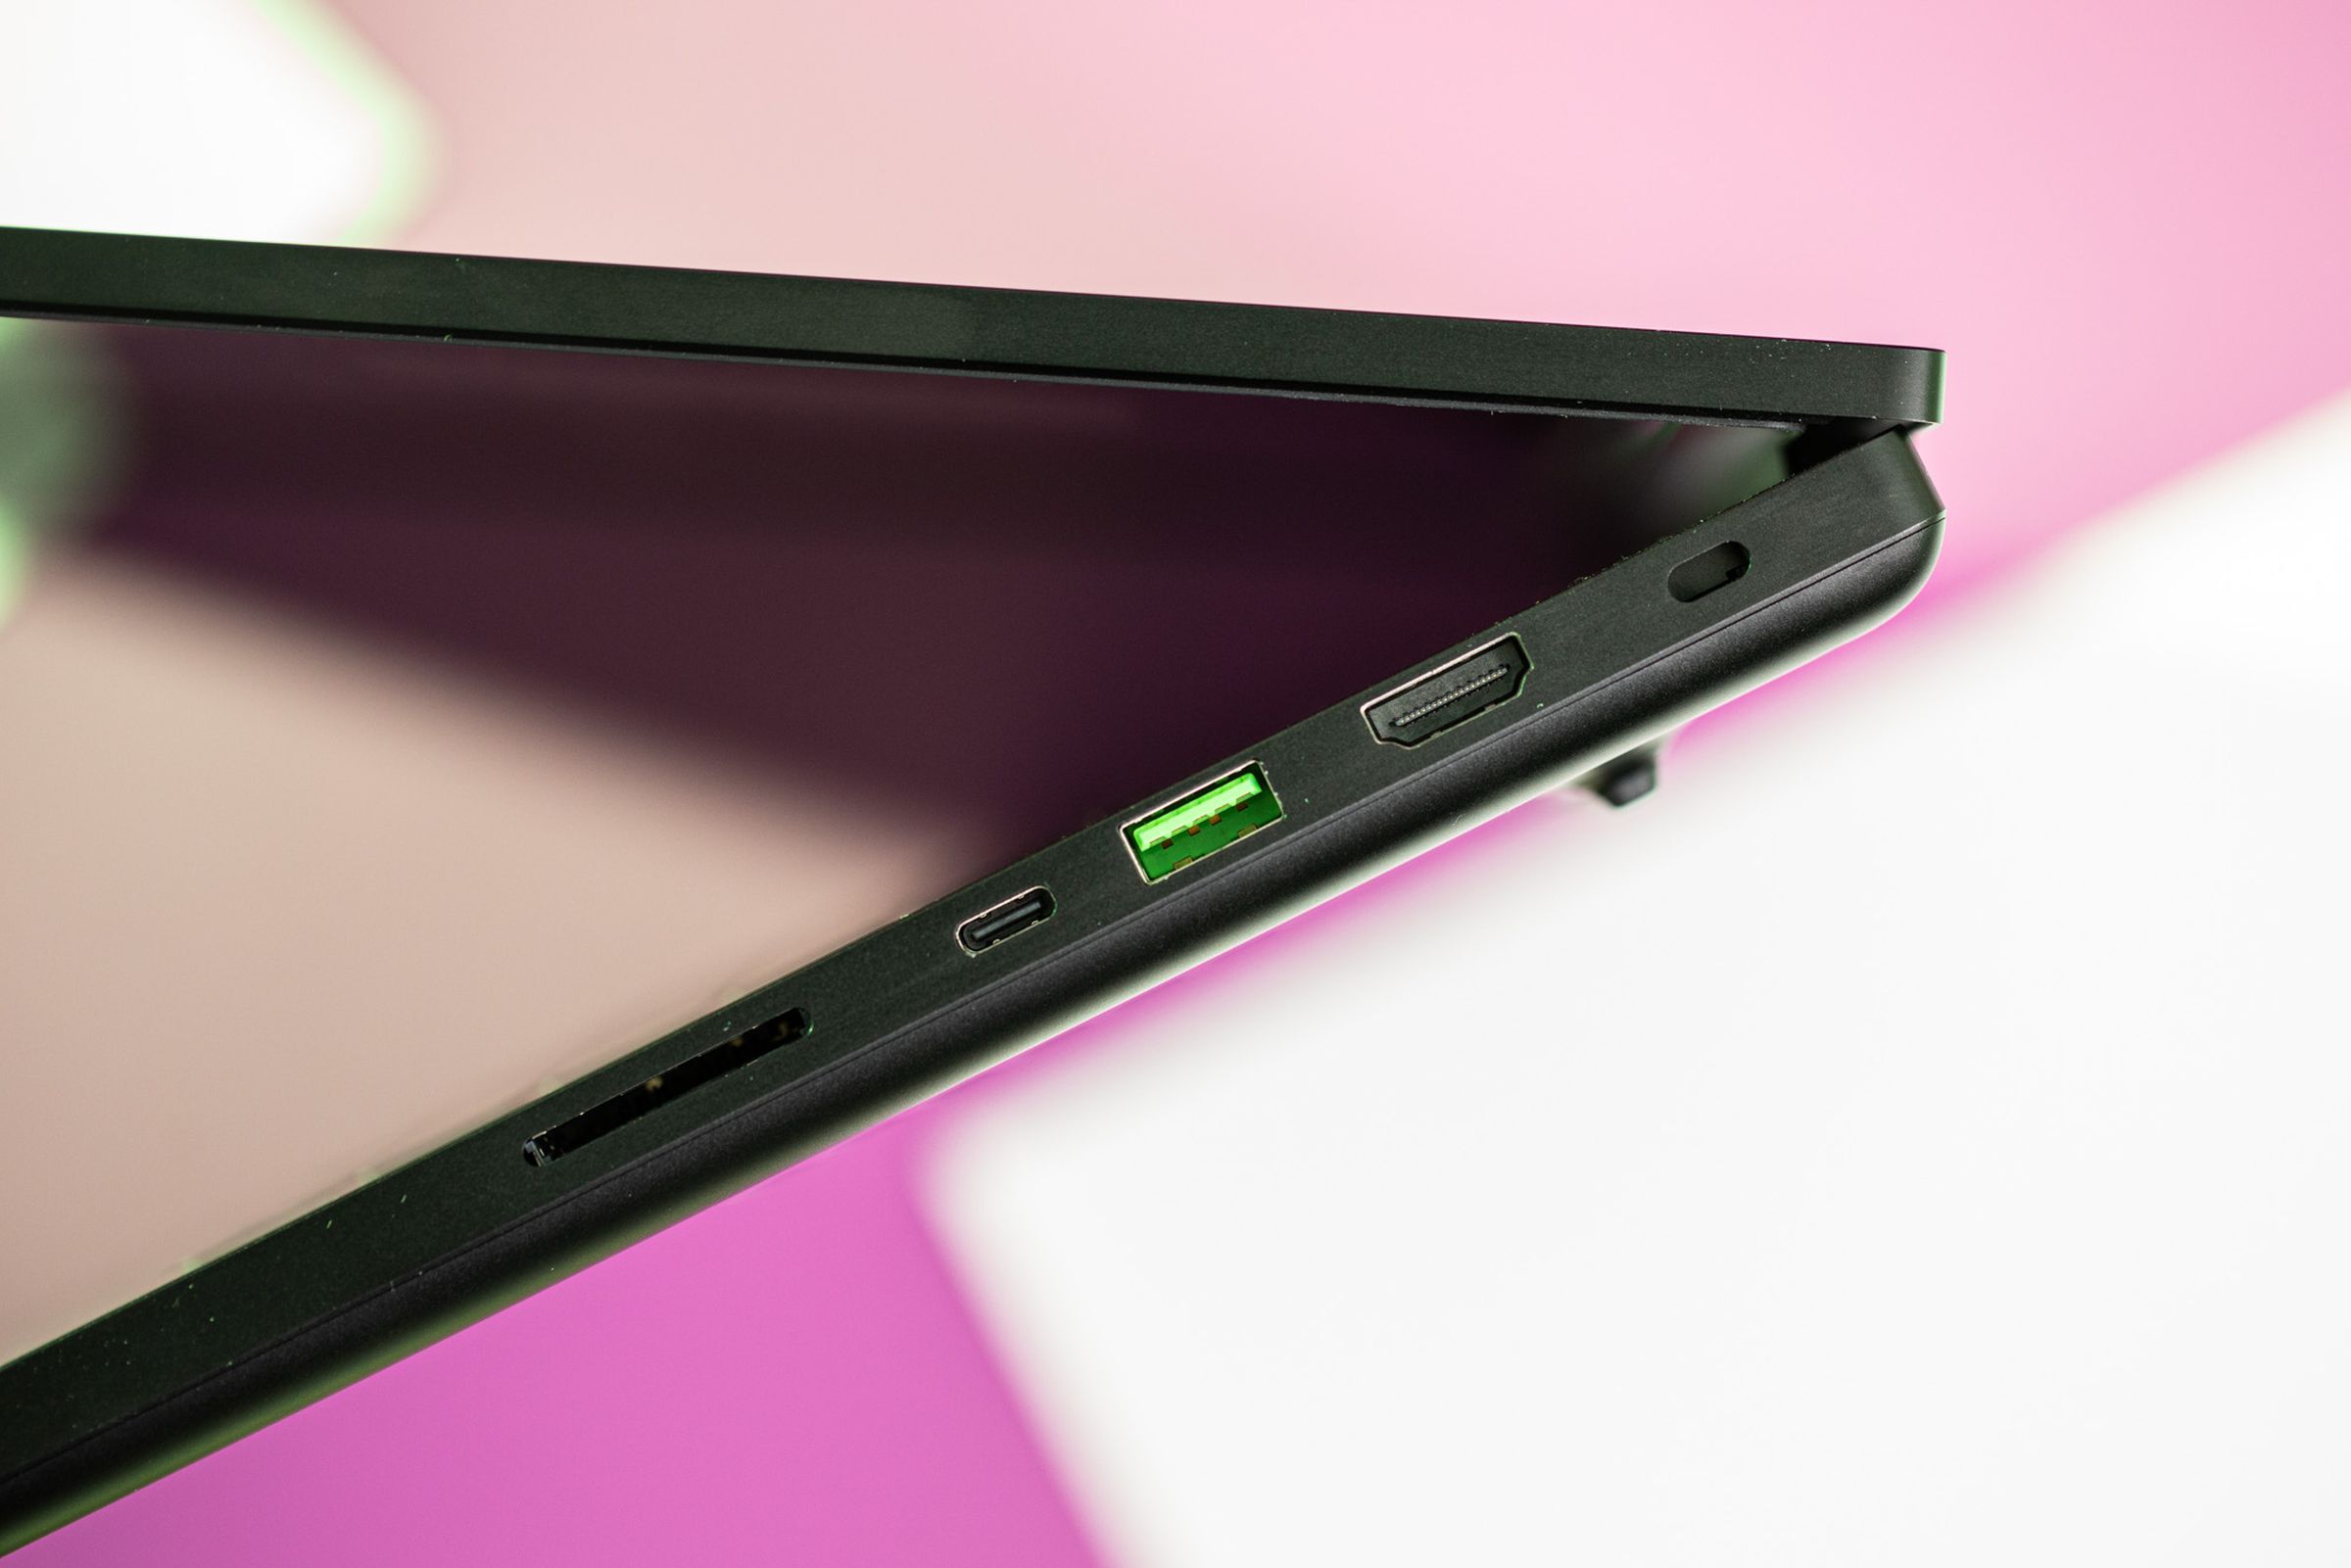 Ports on the right side of the Razer Blade 18.